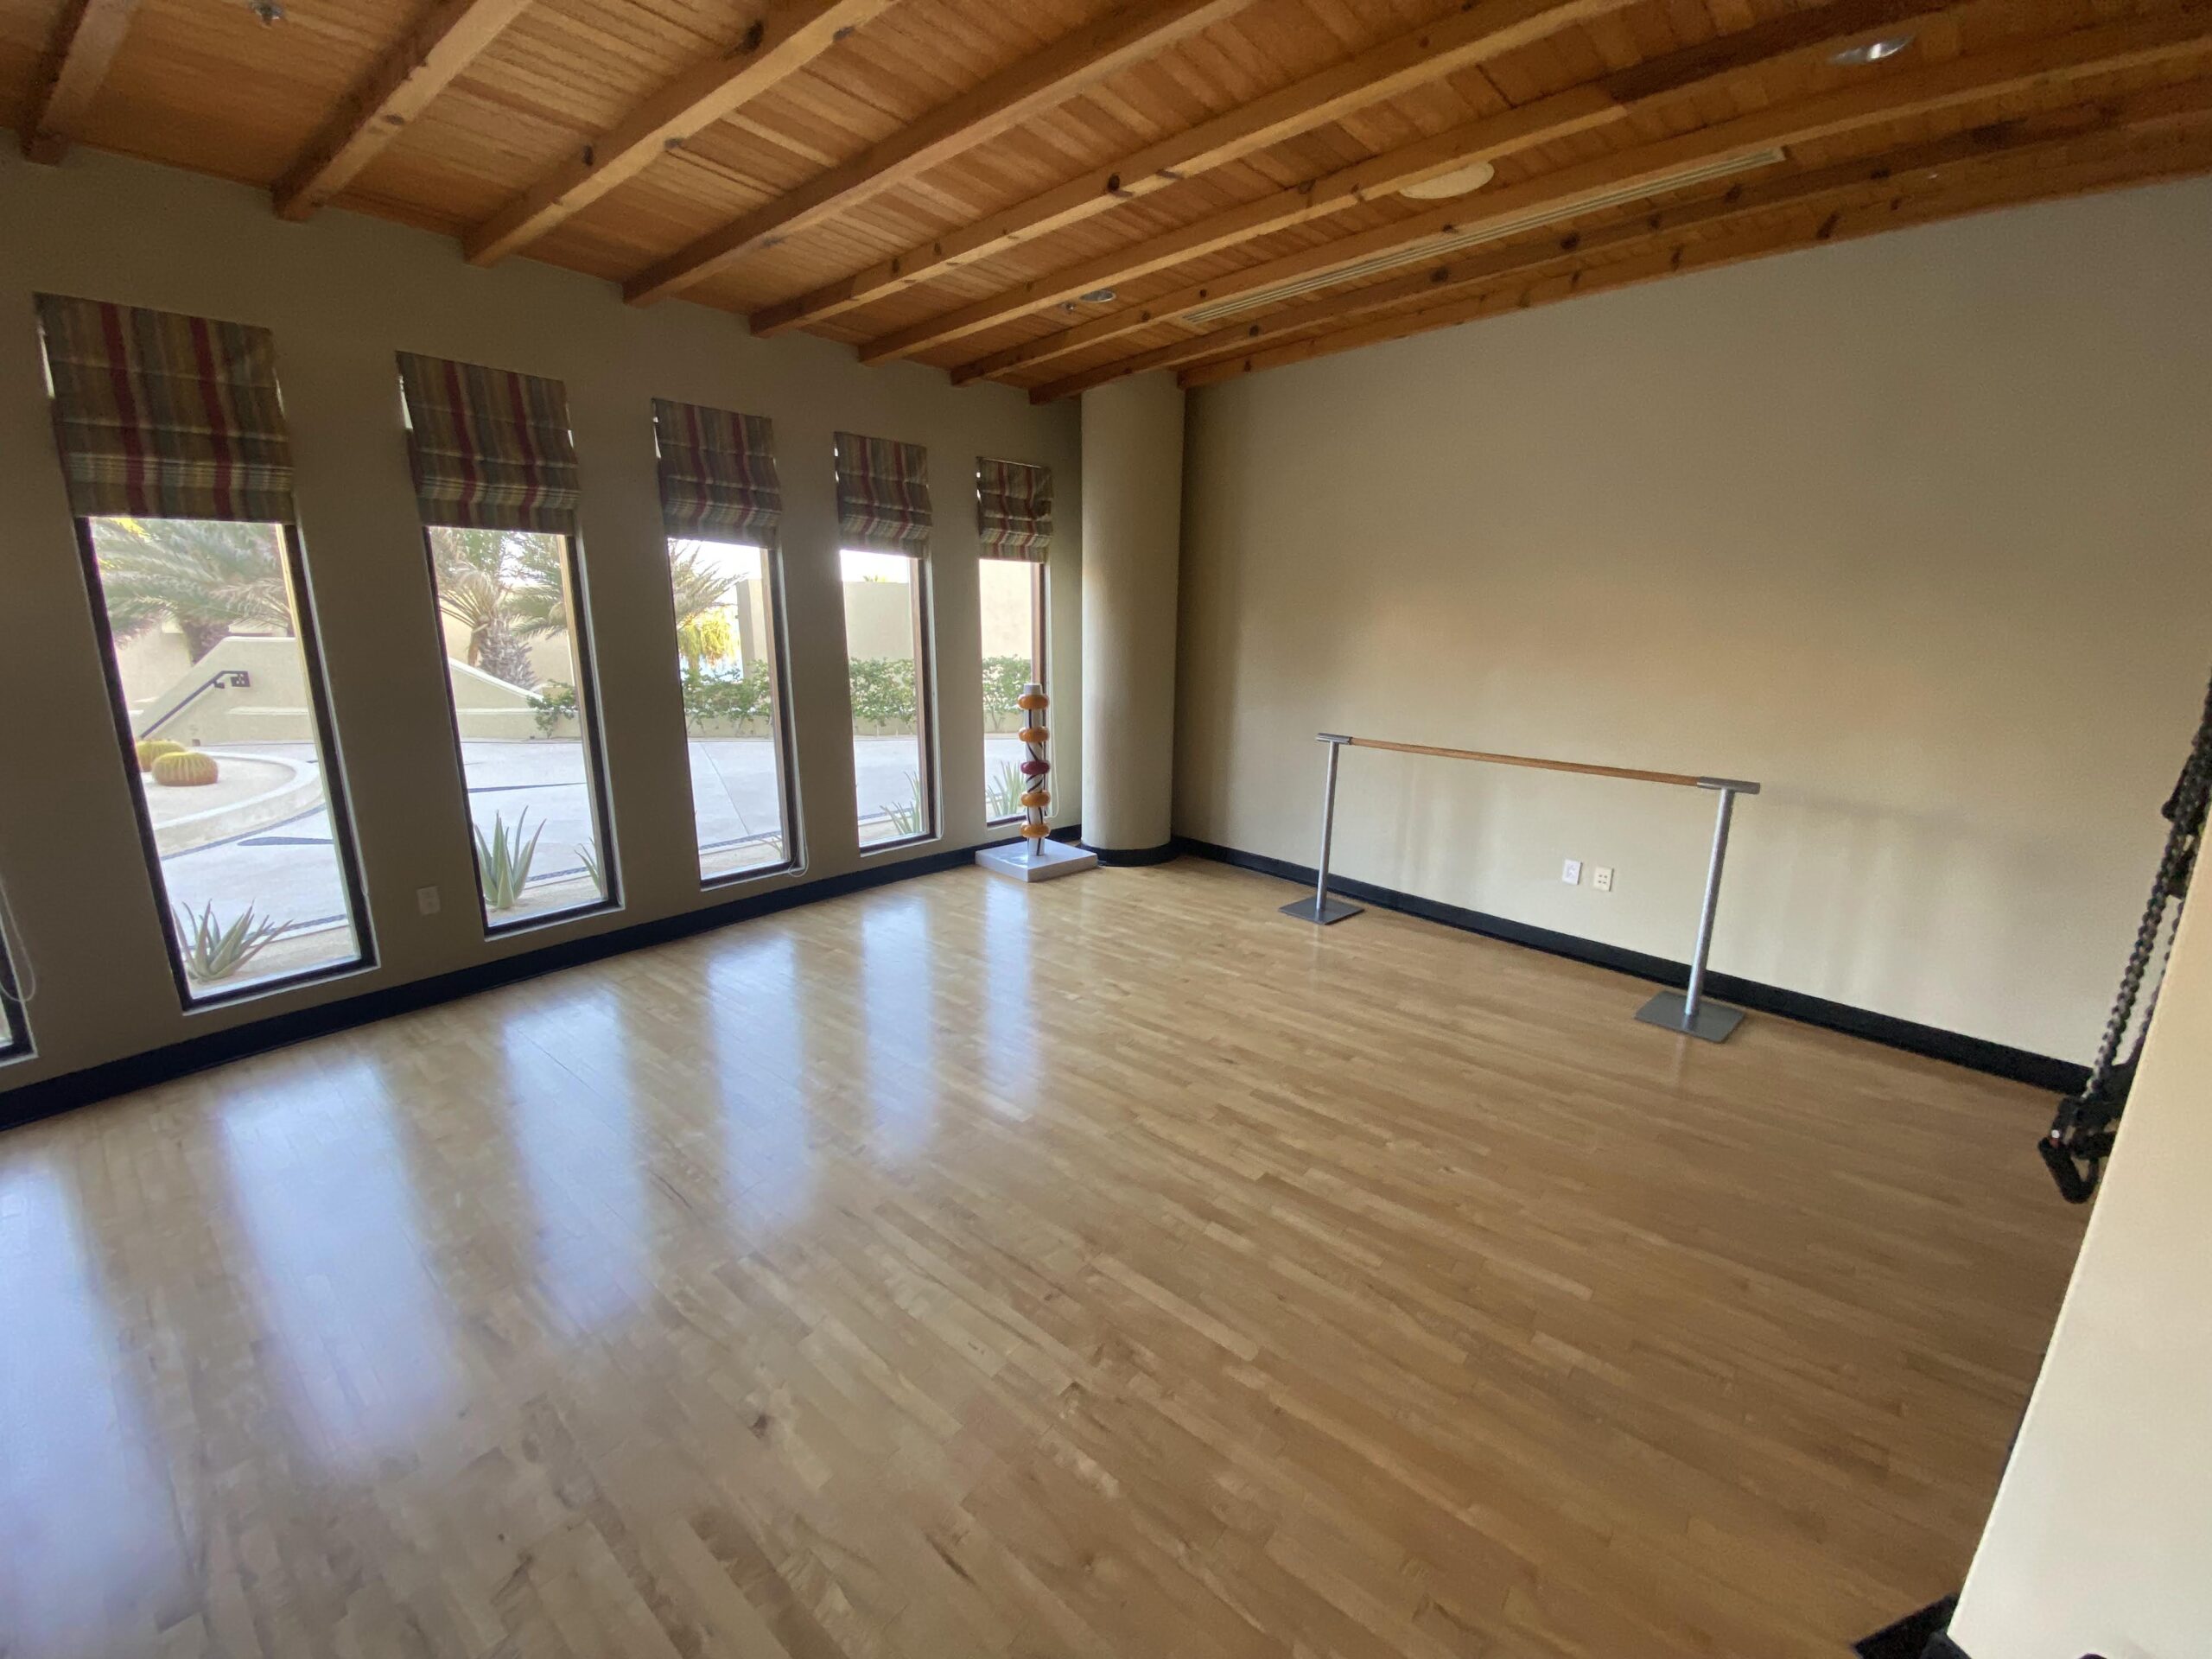 a room with a wooden floor and a pole